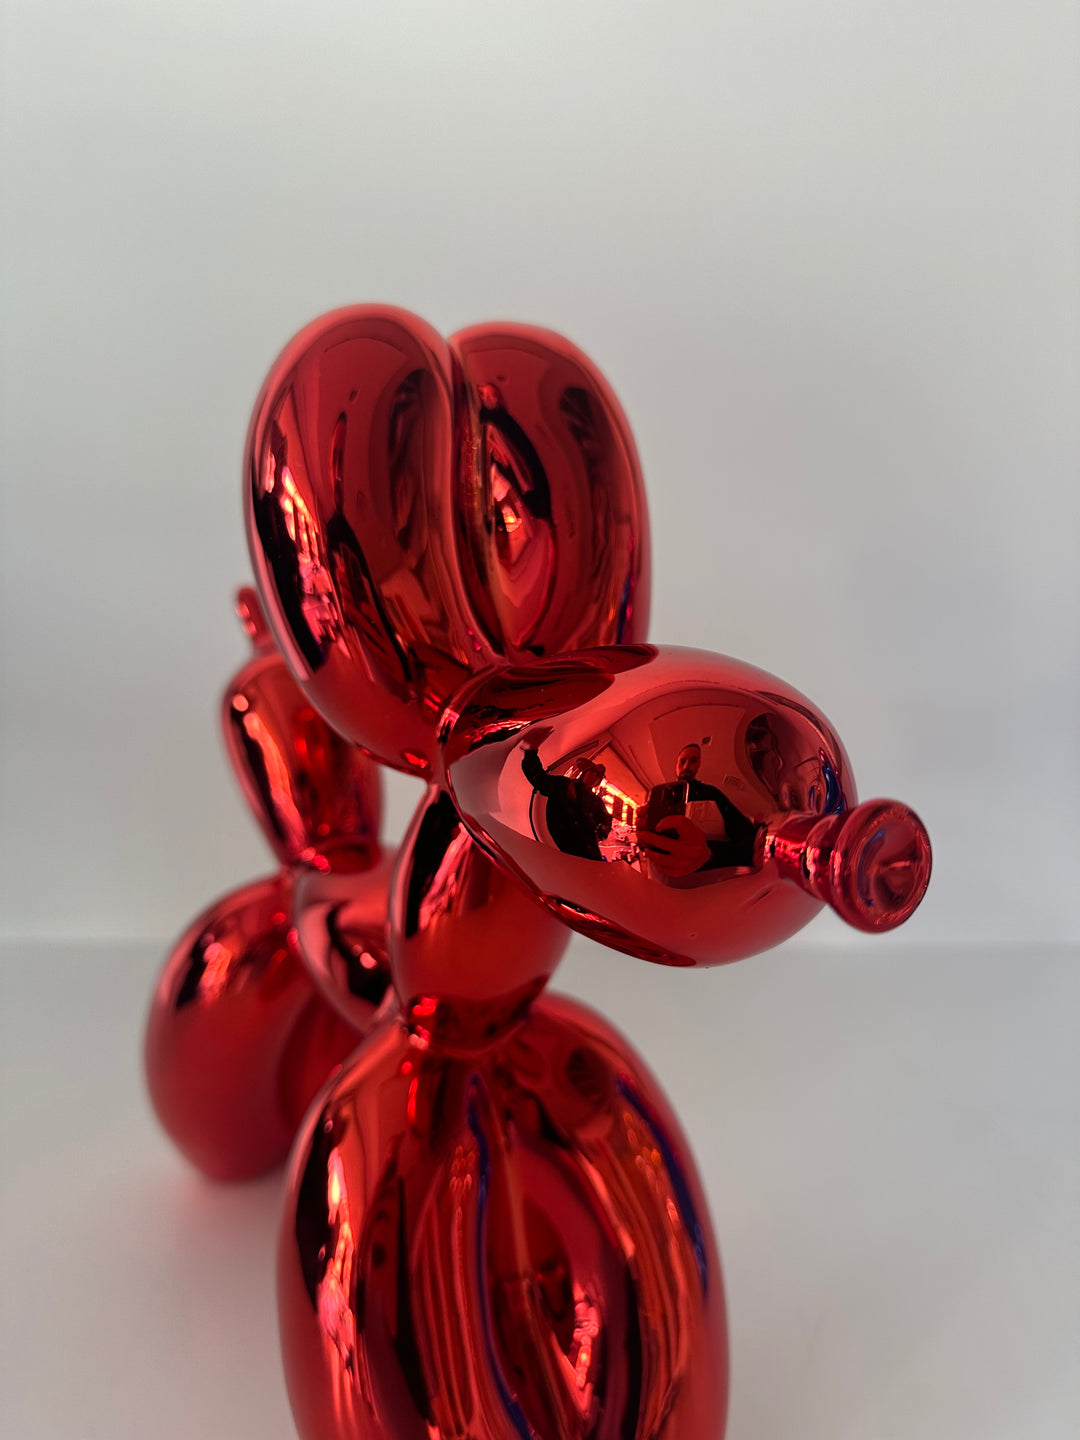 Balloon Dog Red L (After)